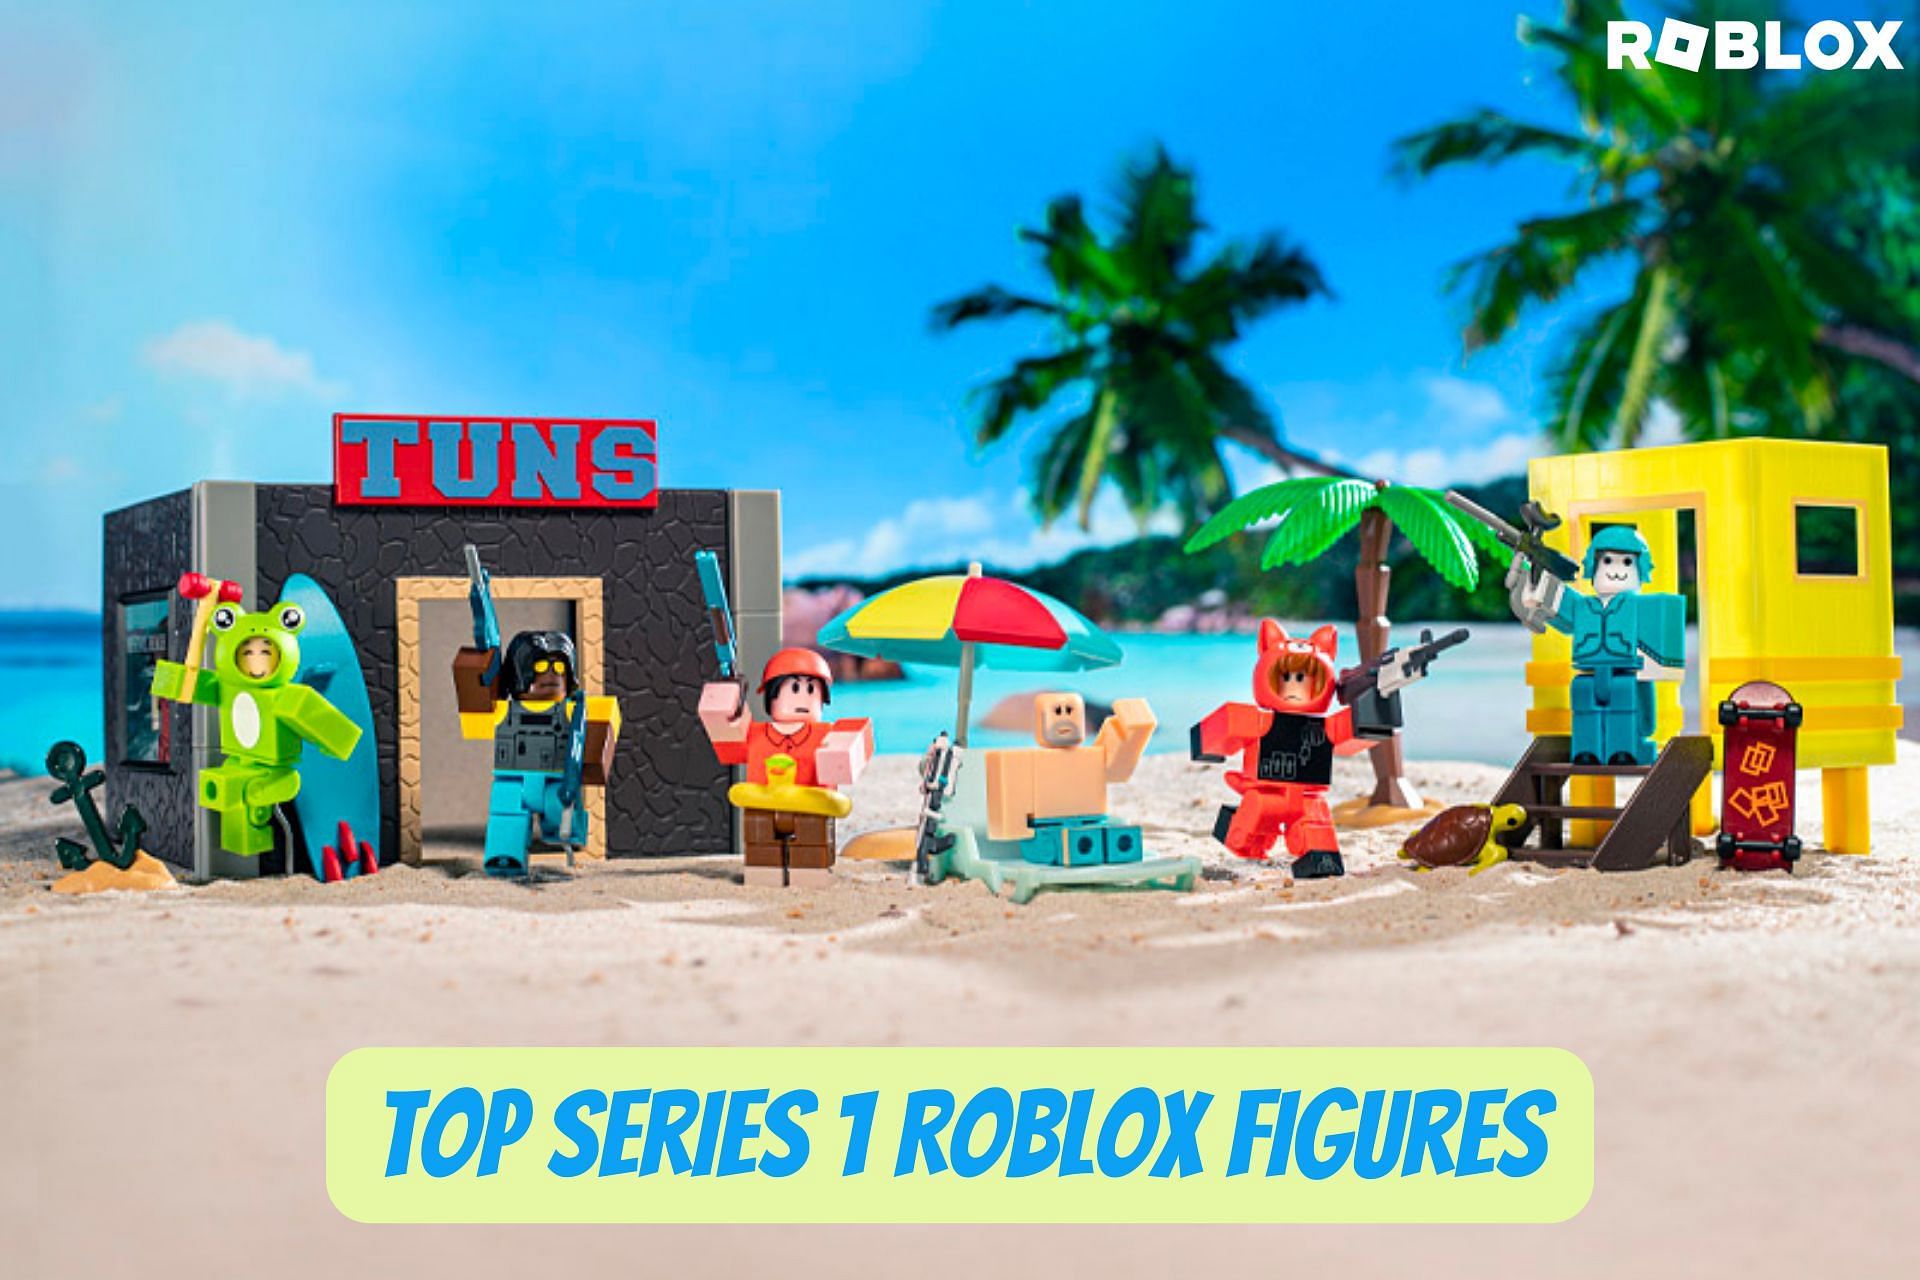 The figures that every Roblox fan must collect (Image via Roblox)